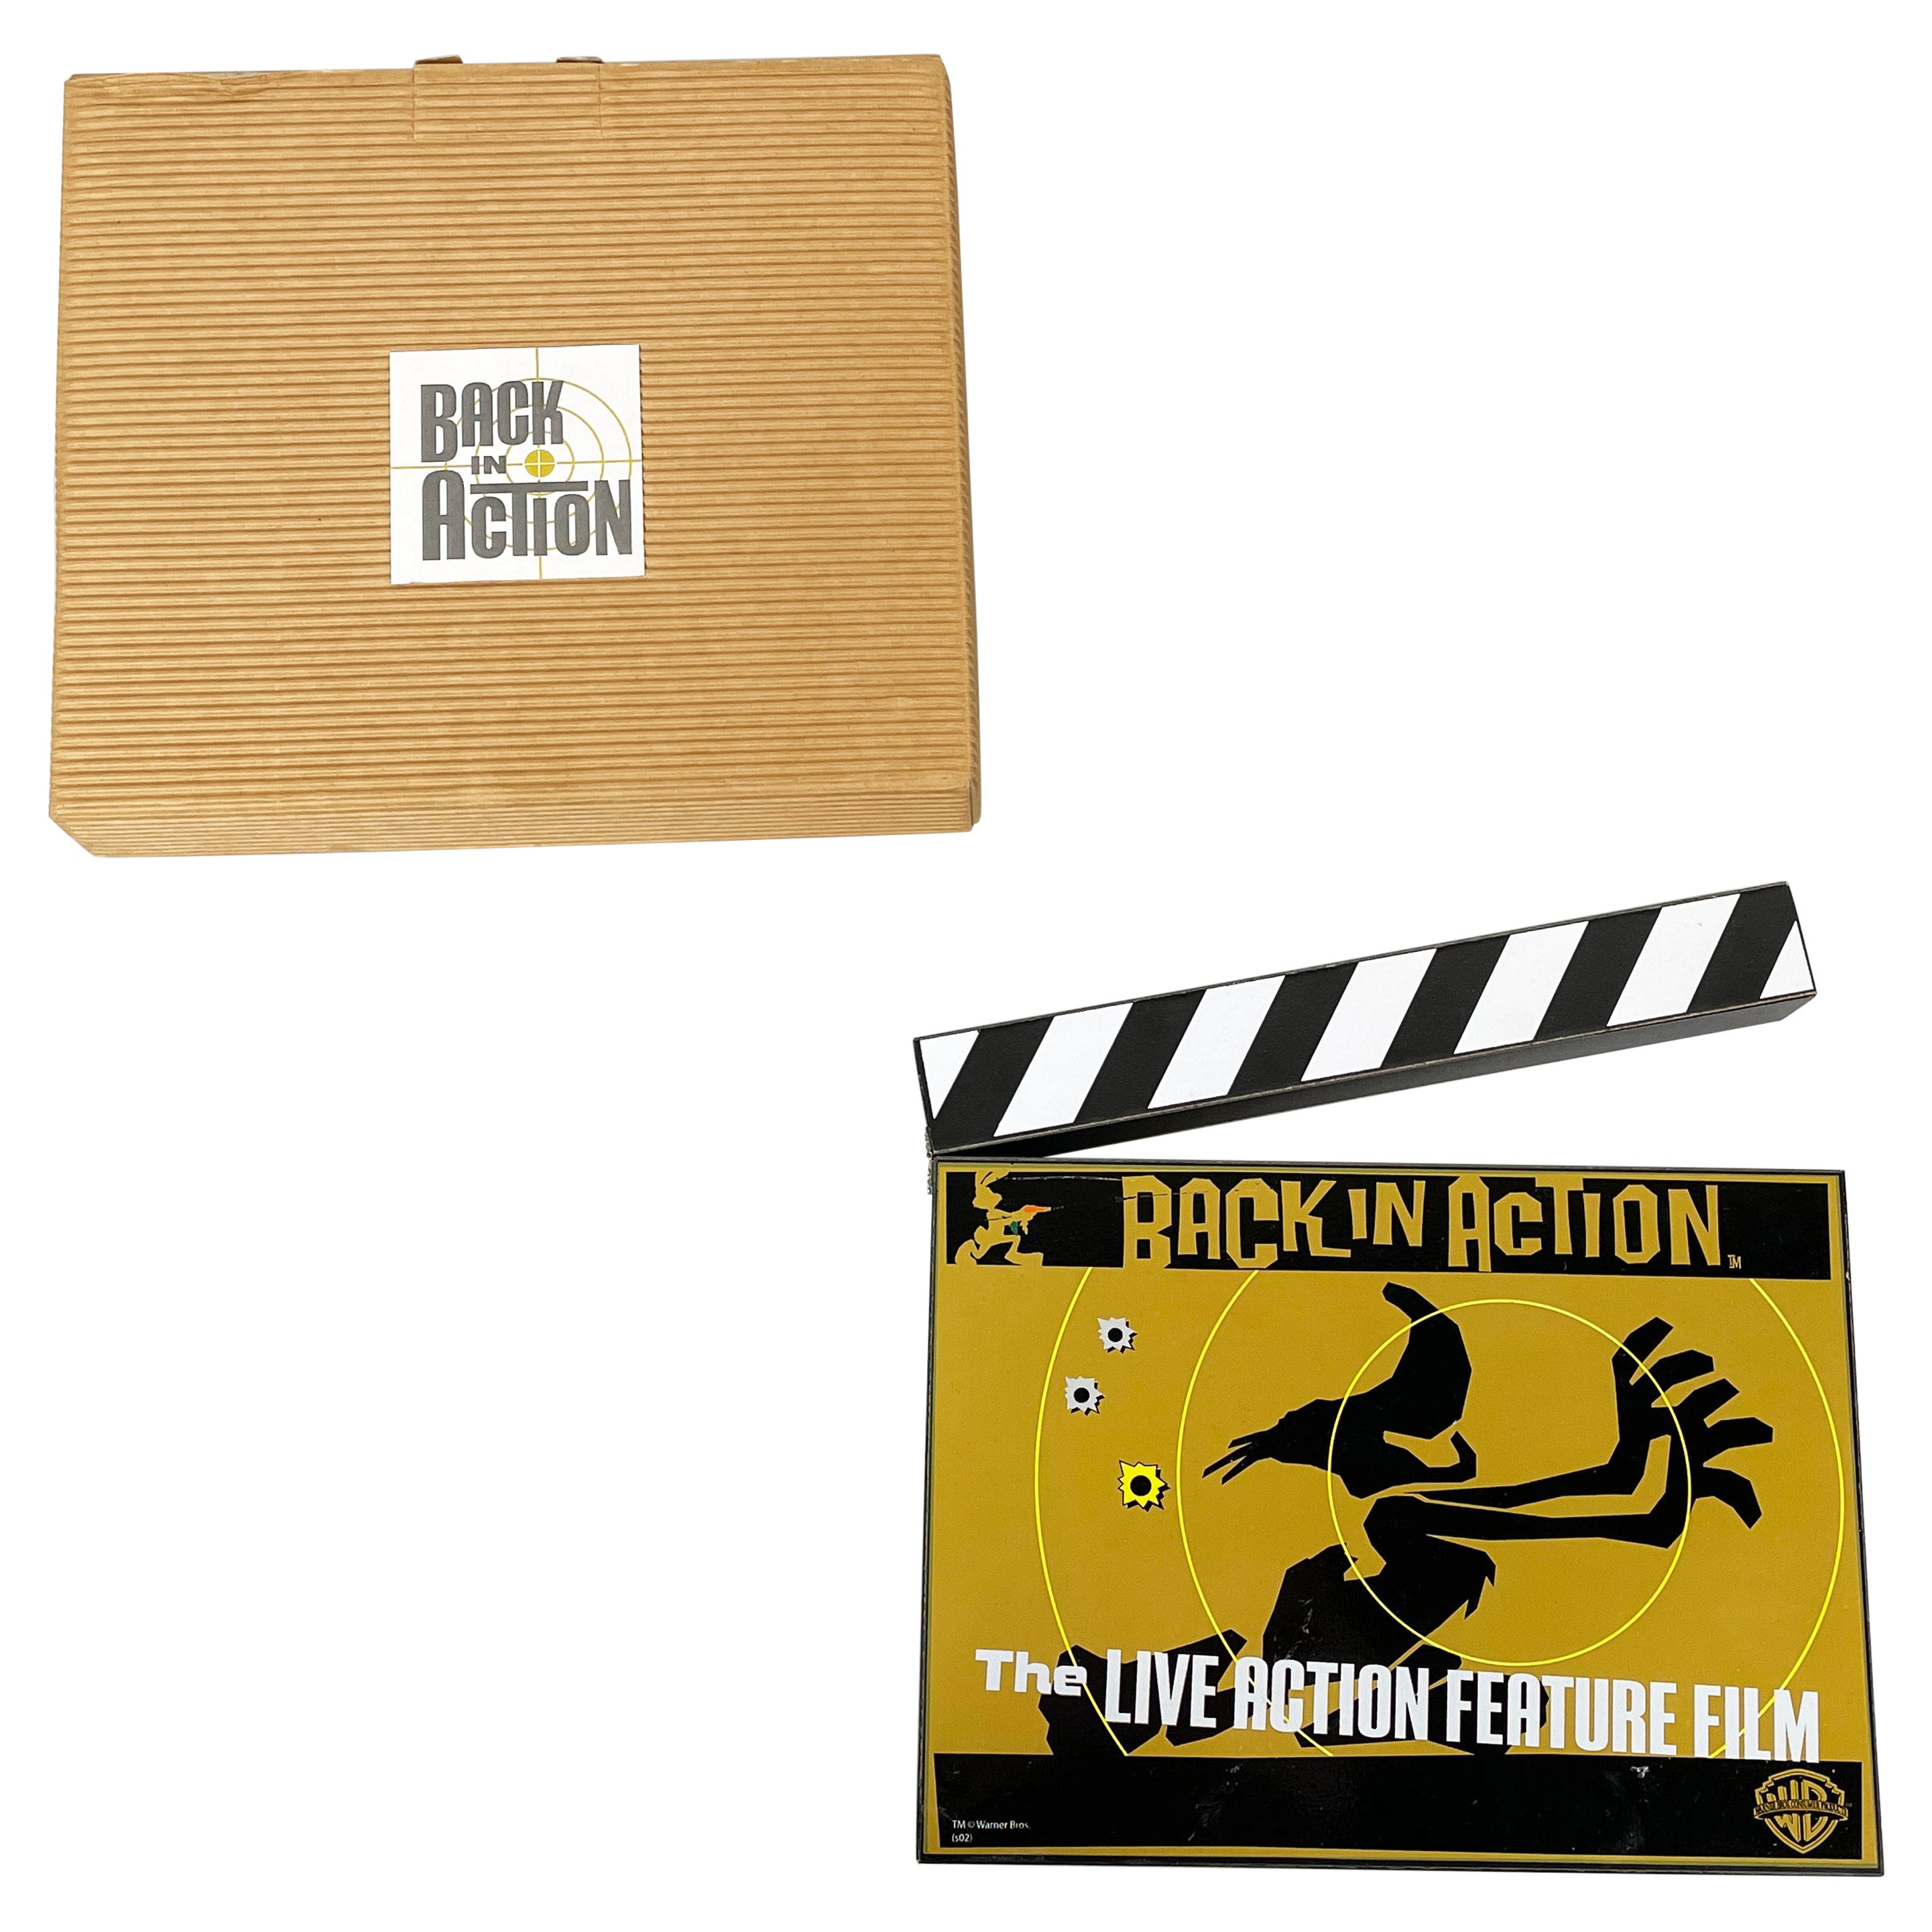 Italy modern Wood clapperboard Looney Tunes: Back in action by Warner Bros, 2003 For Sale